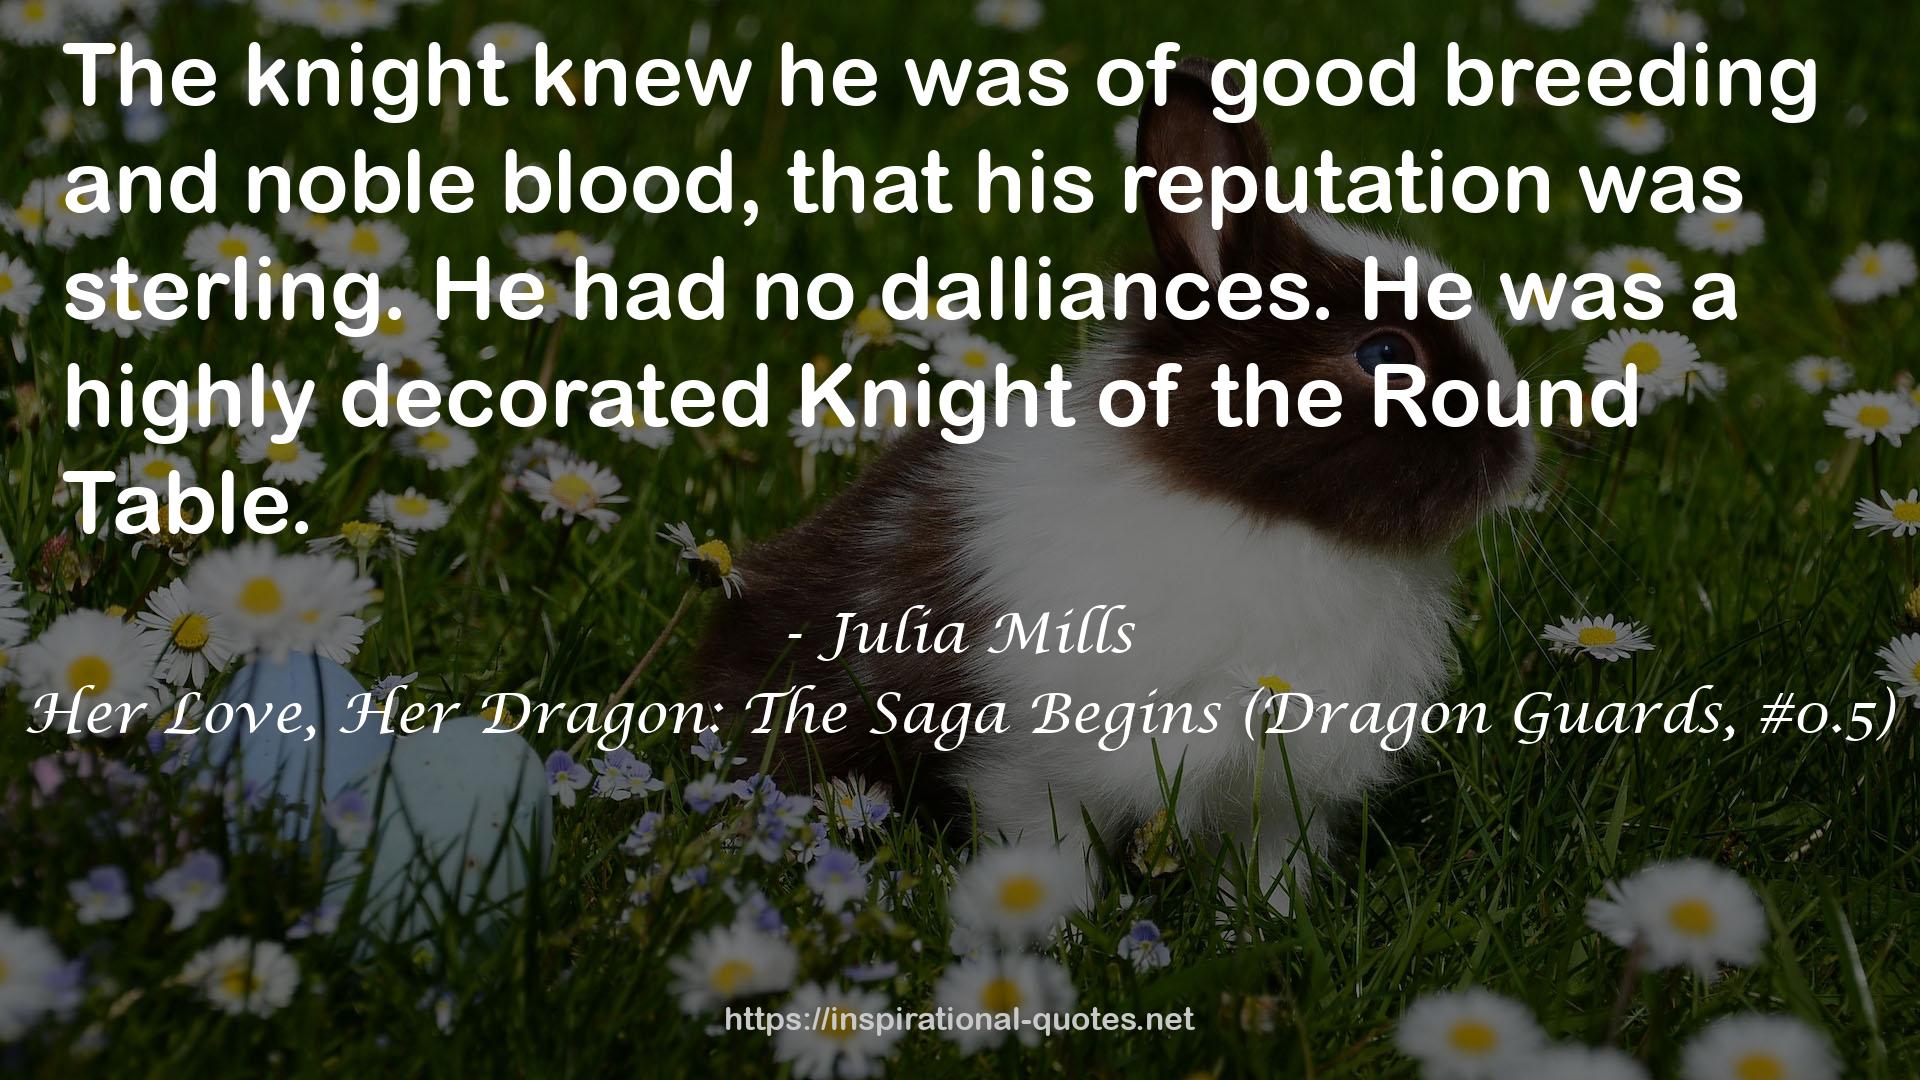 a highly decorated Knight  QUOTES